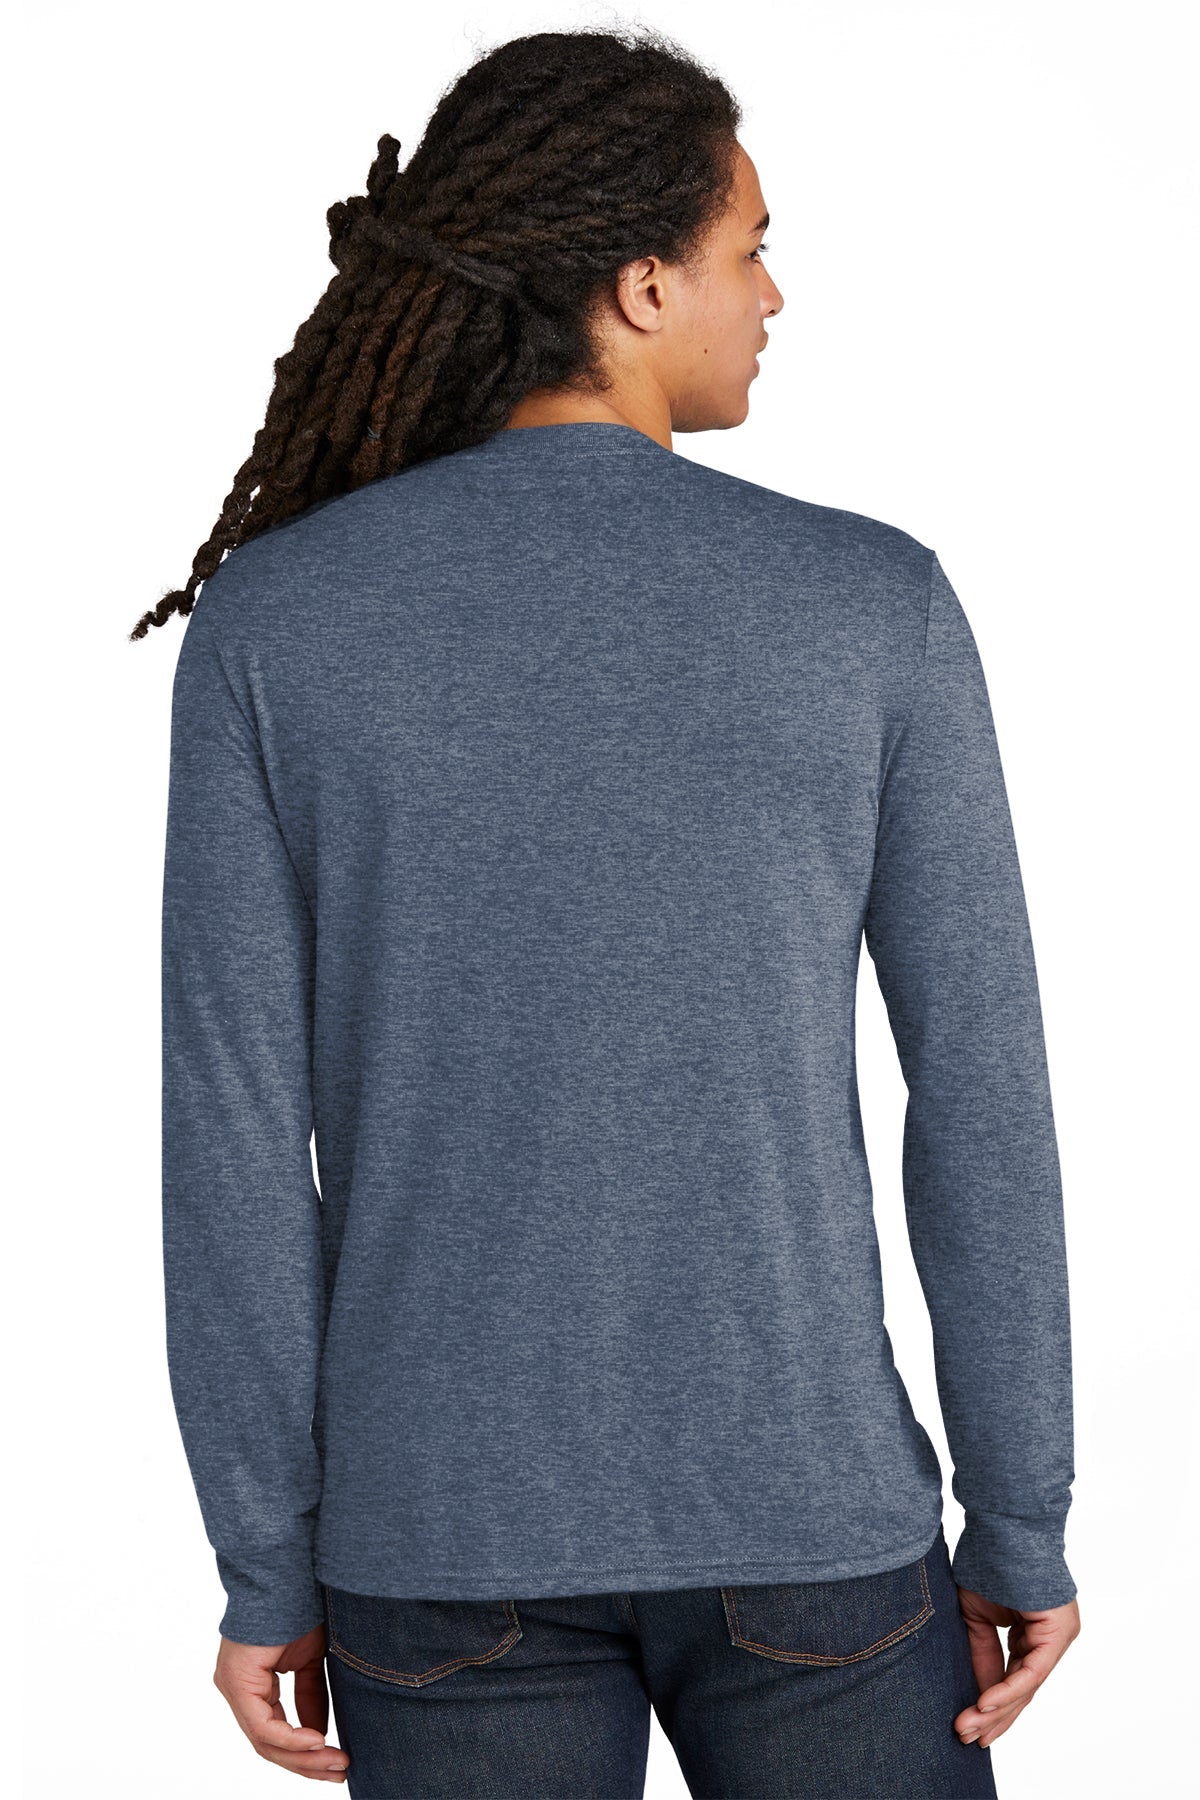 DM132 District ® Perfect Tri ® Long Sleeve Tee